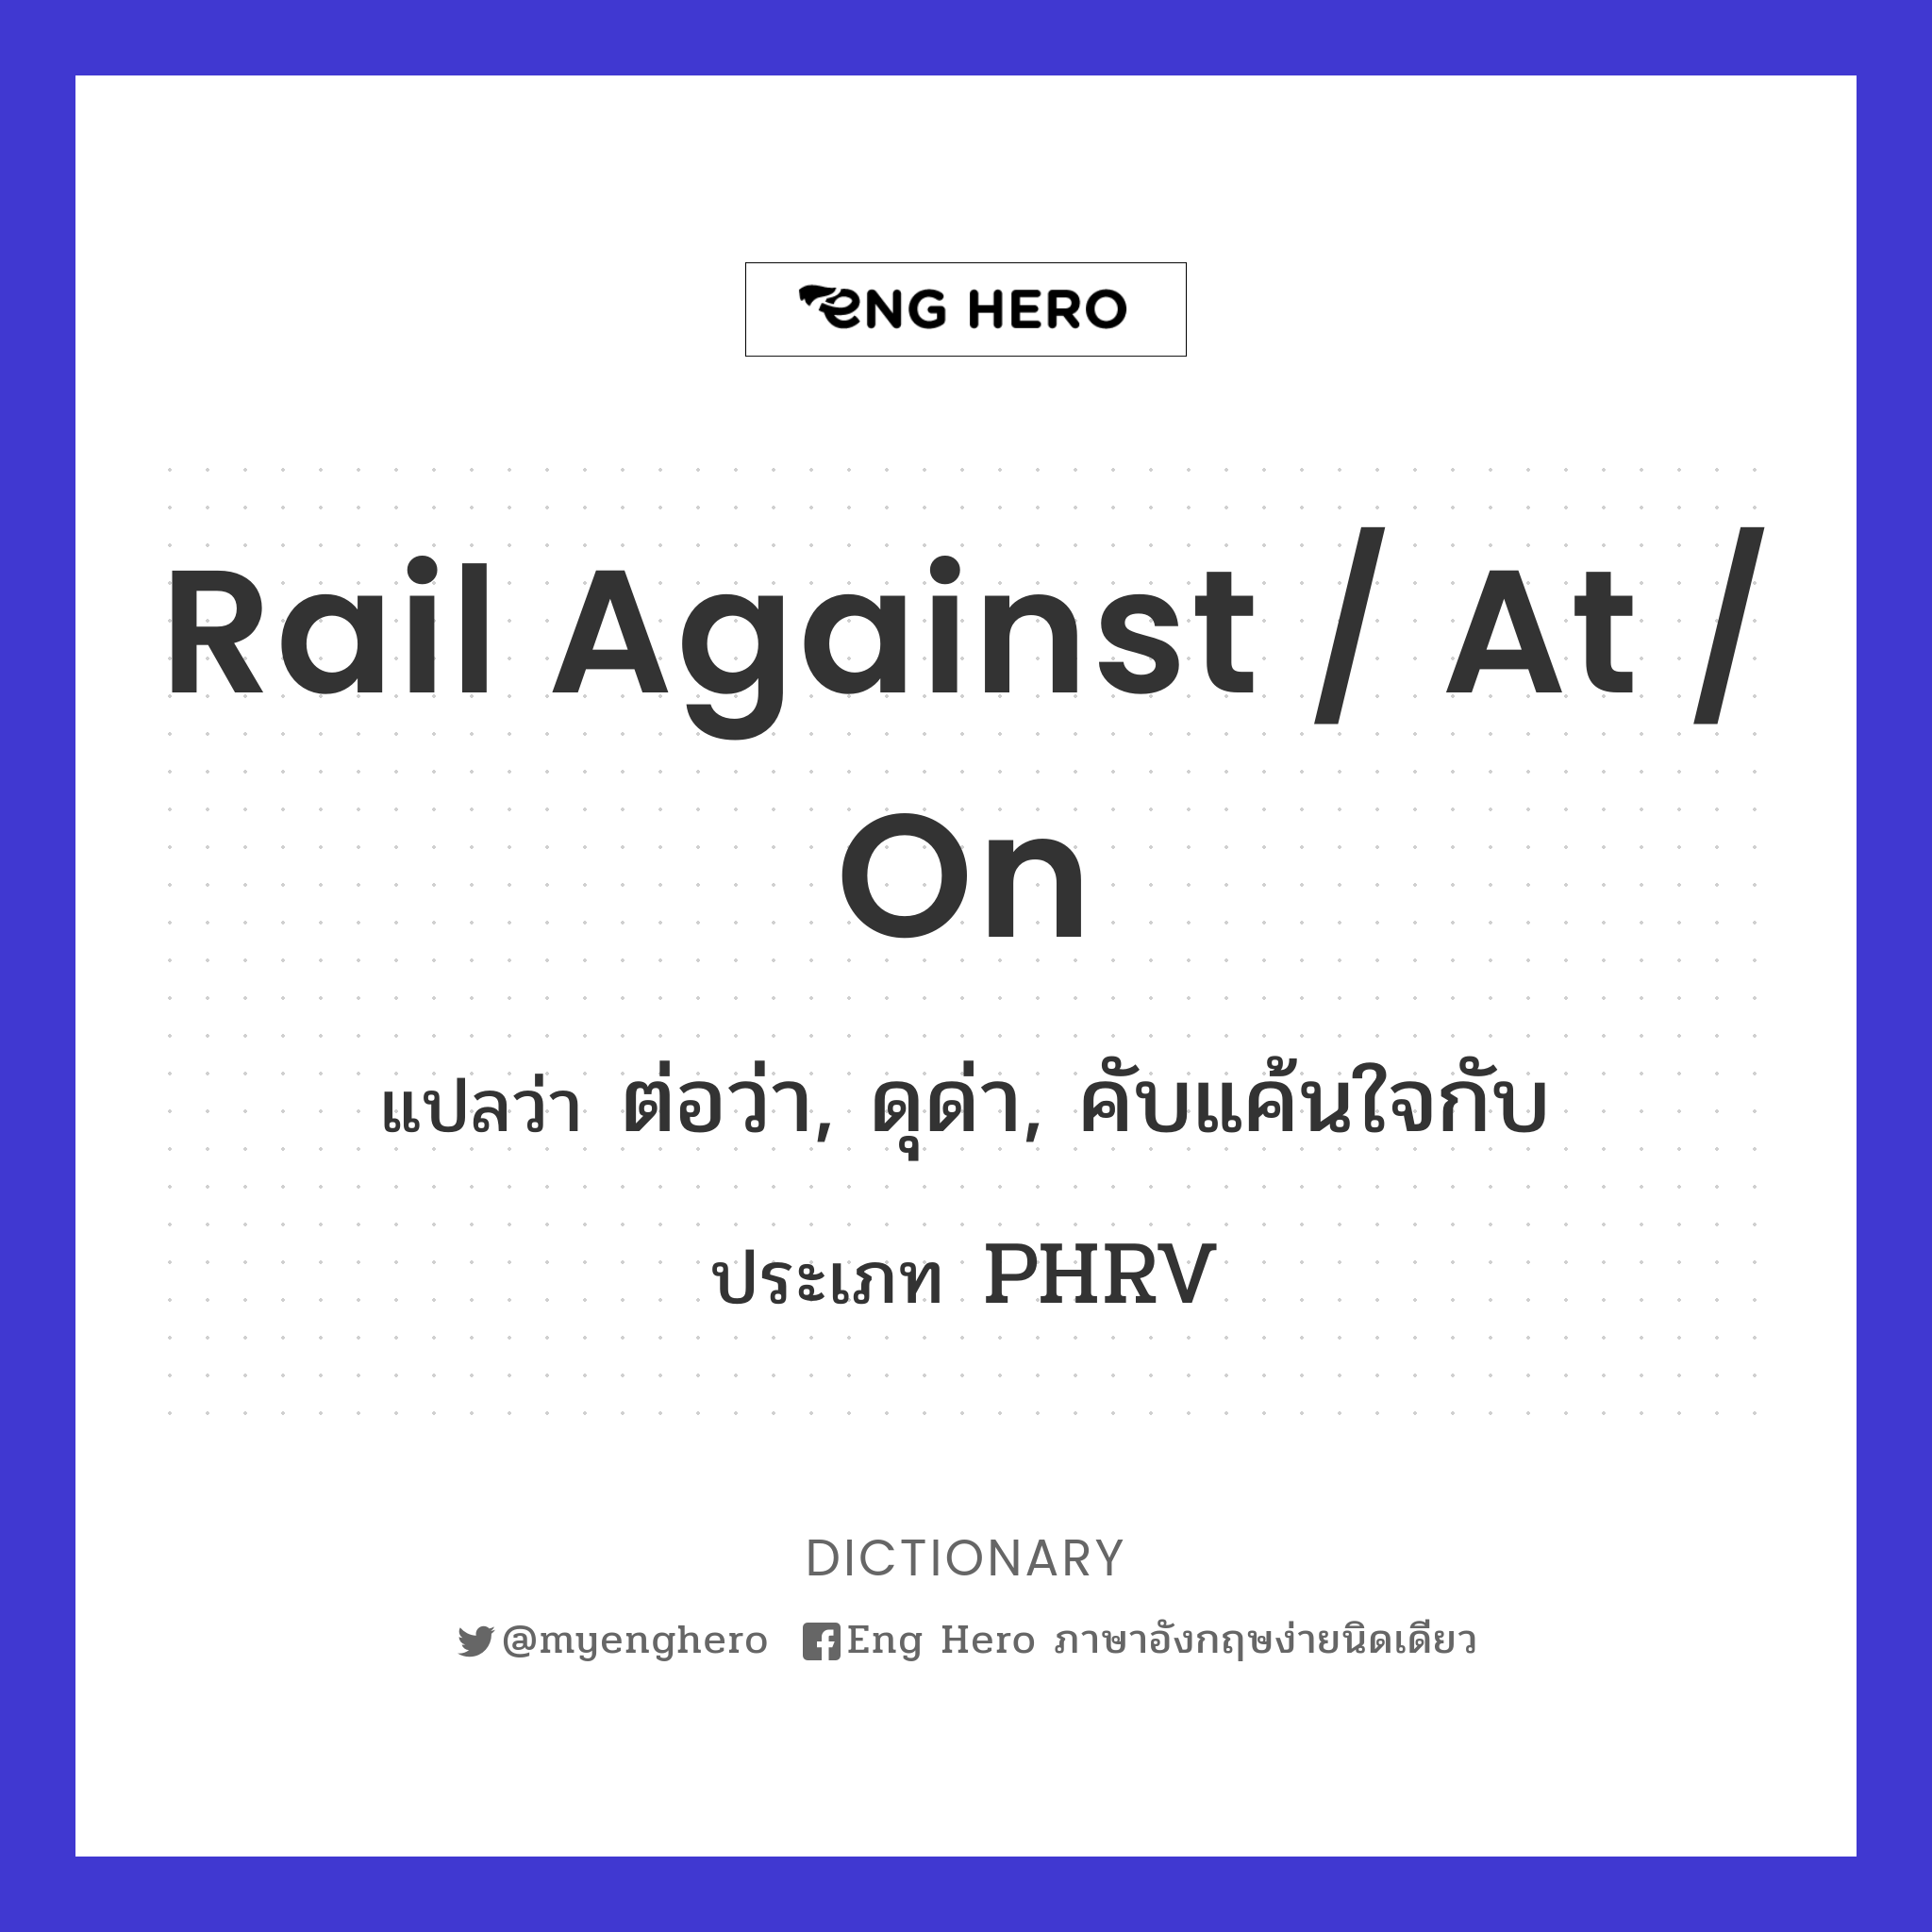 rail against / at / on